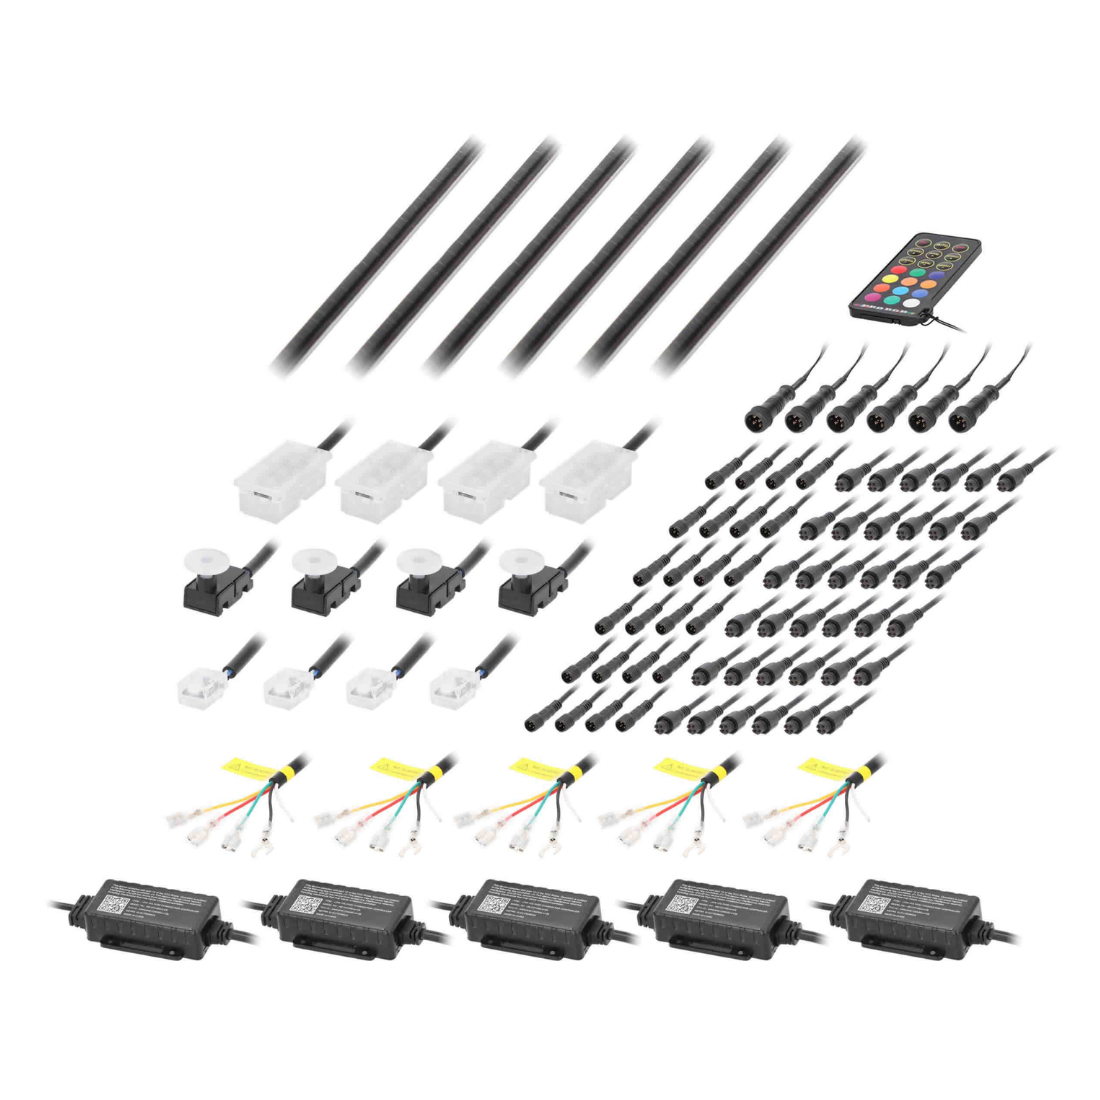 Heise HE-AMB-CAR 18-Piece Complete Chasing Interior Ambient LED Lighting Kit